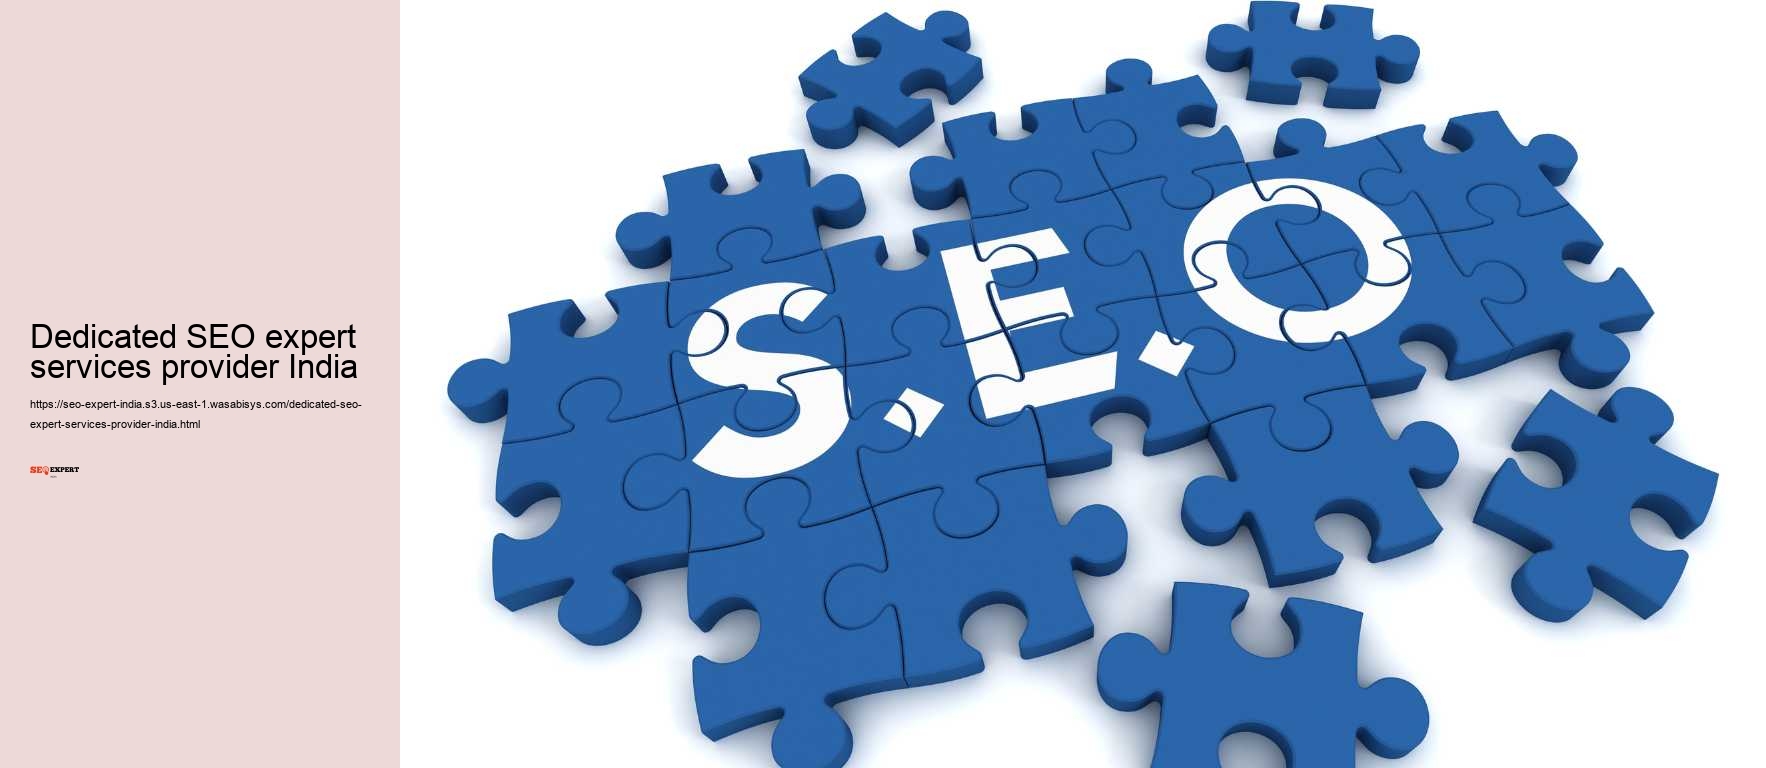 Dedicated SEO expert services provider India